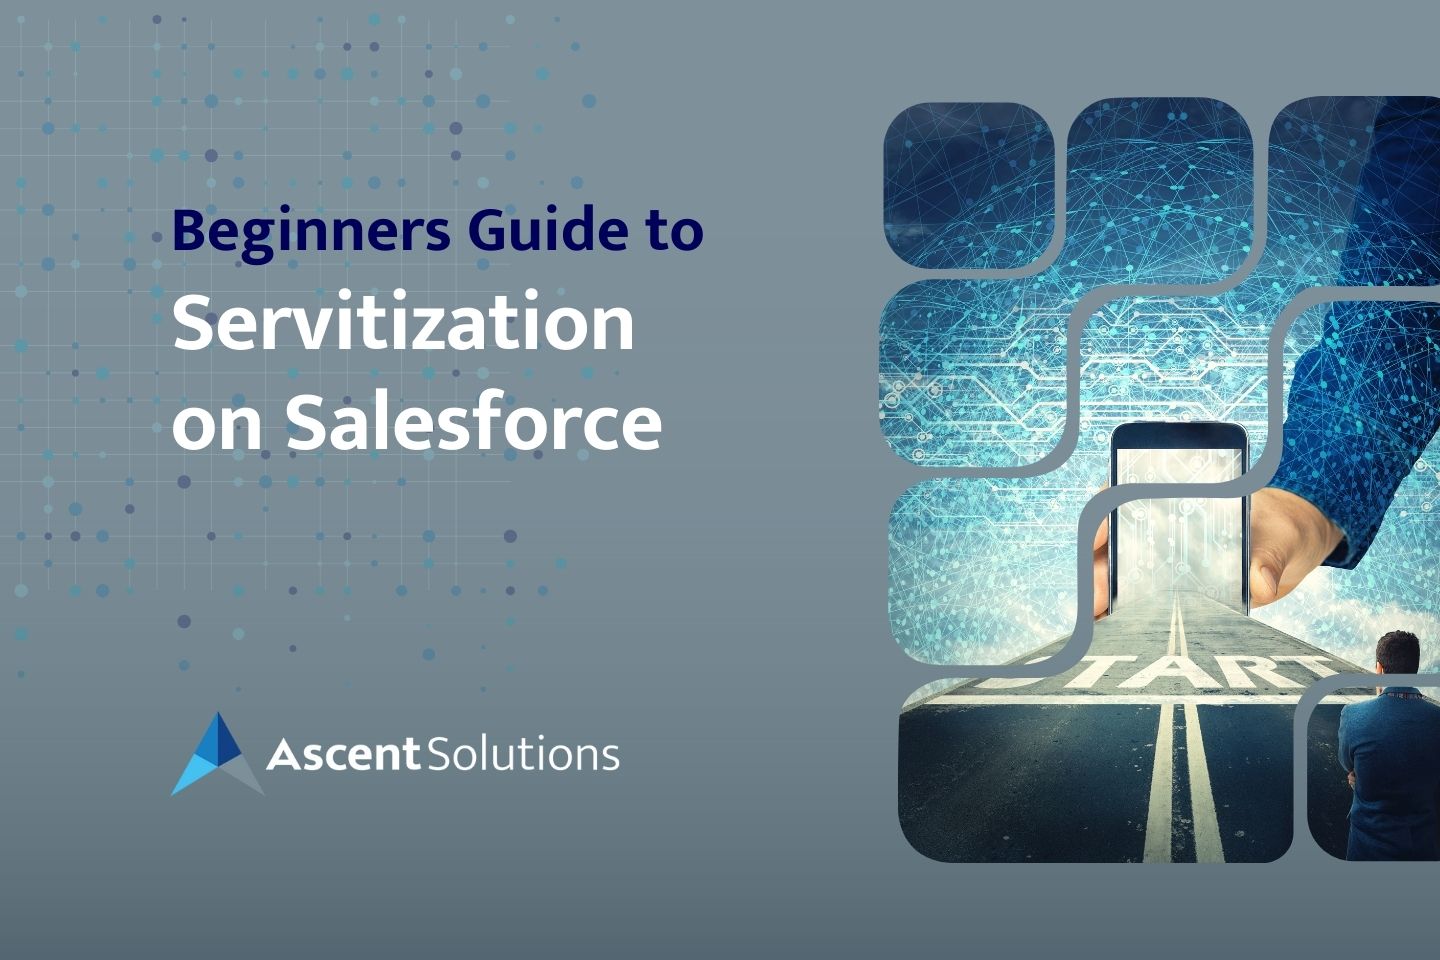 Beginners Guide to Servitization on Salesforce